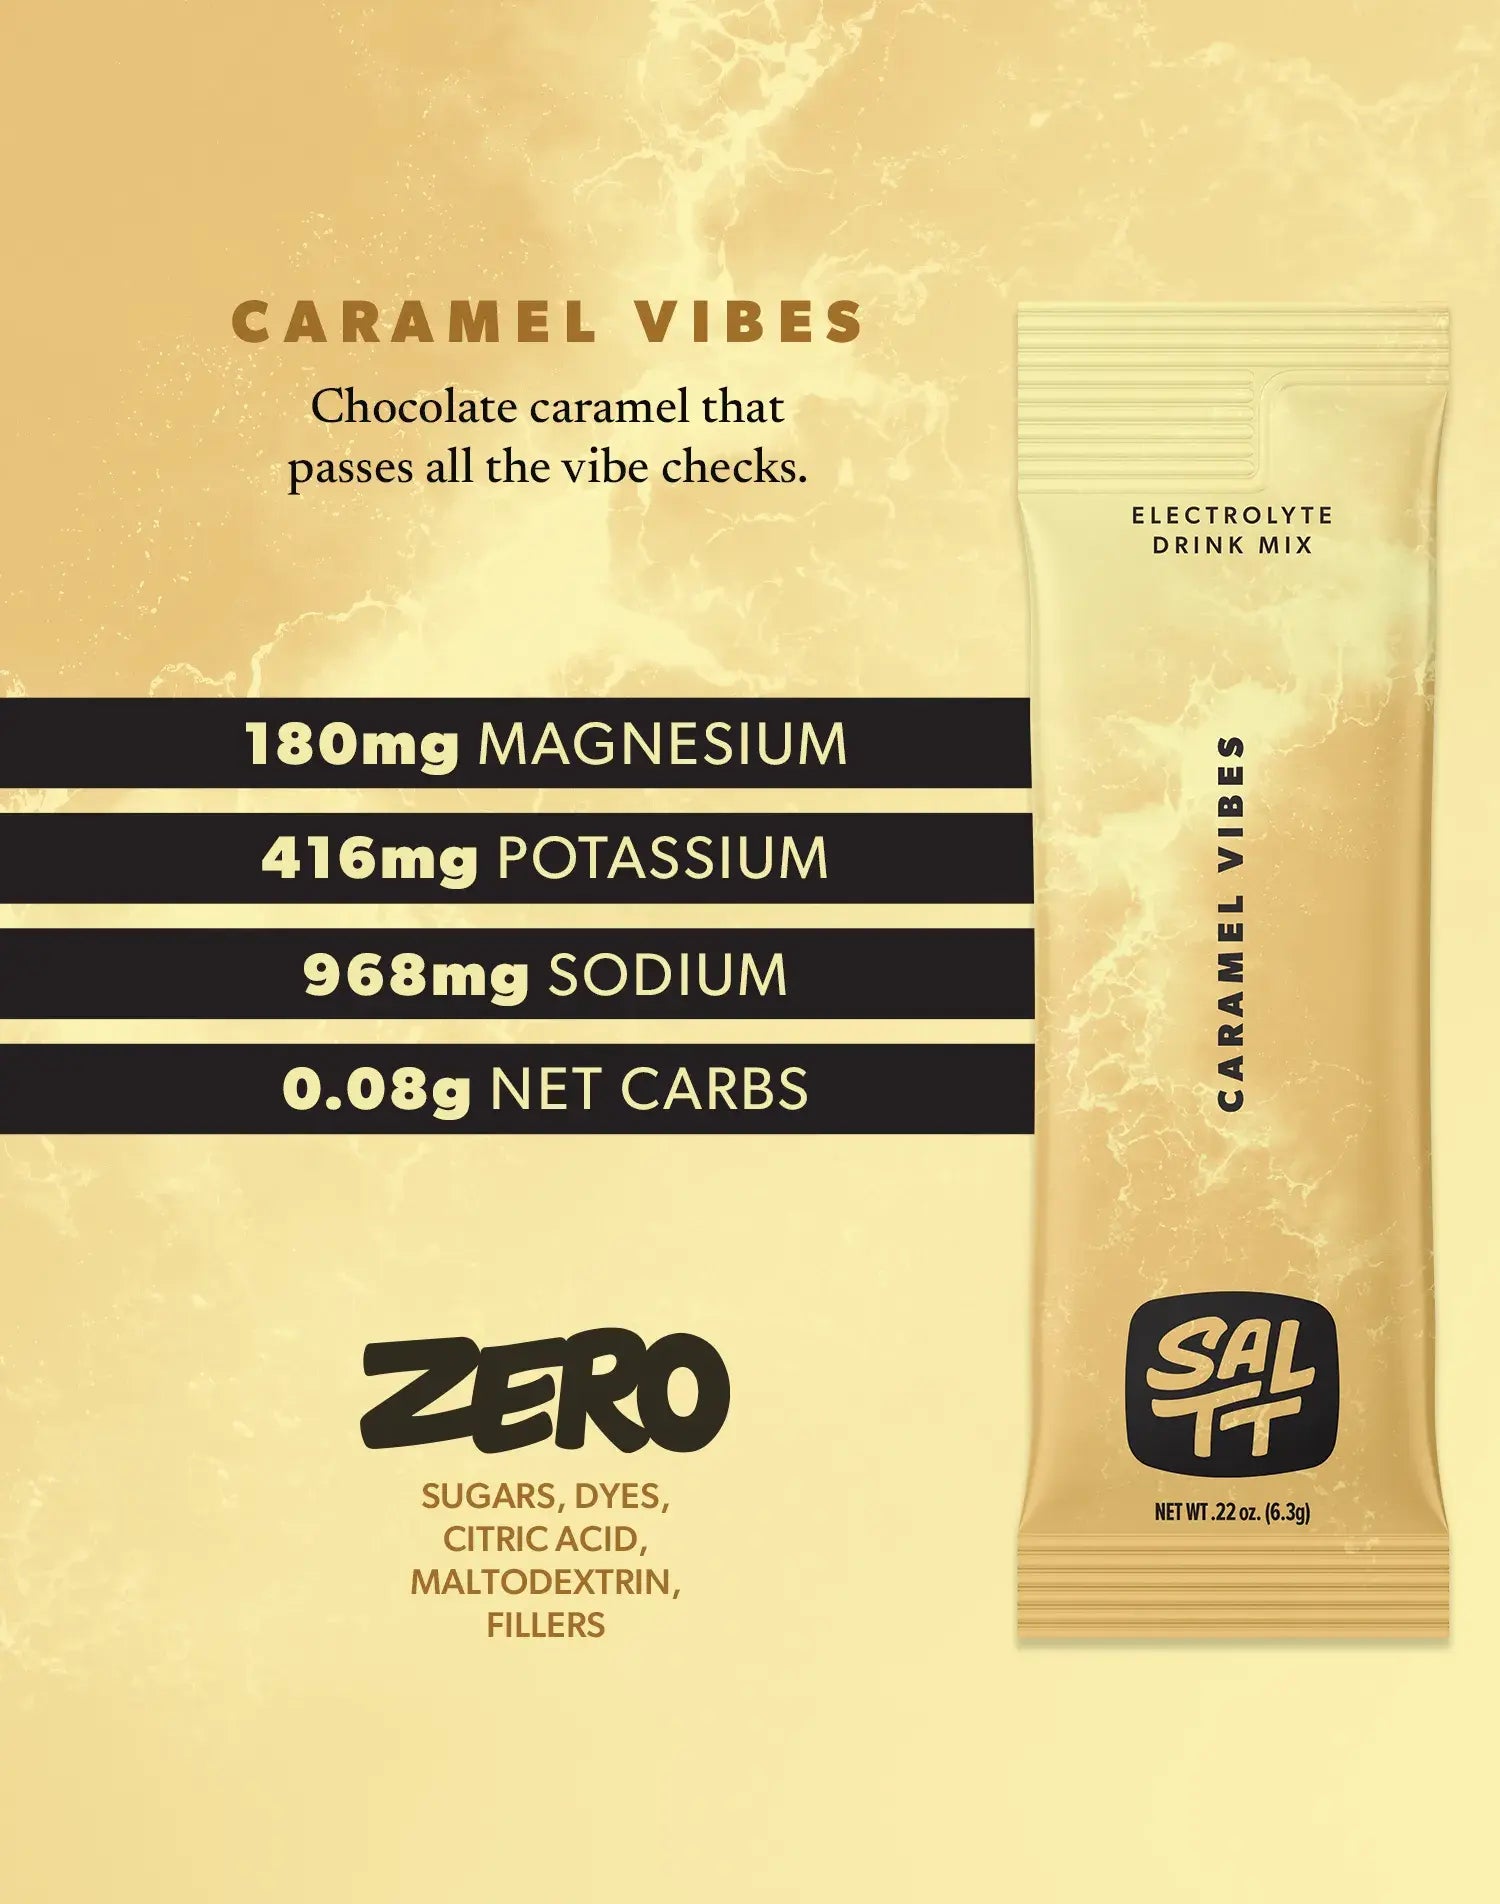 Nutrition for Caramel Vibes flavor. Caramel Vibes has 180mg Magnesium, 416mg Potassium, 968mg Sodium, 0.08g net carbs. Zero sugars, dyes, citric acid, maltodextrin, or fillers. See nutrition dropdown for complete supplement facts.